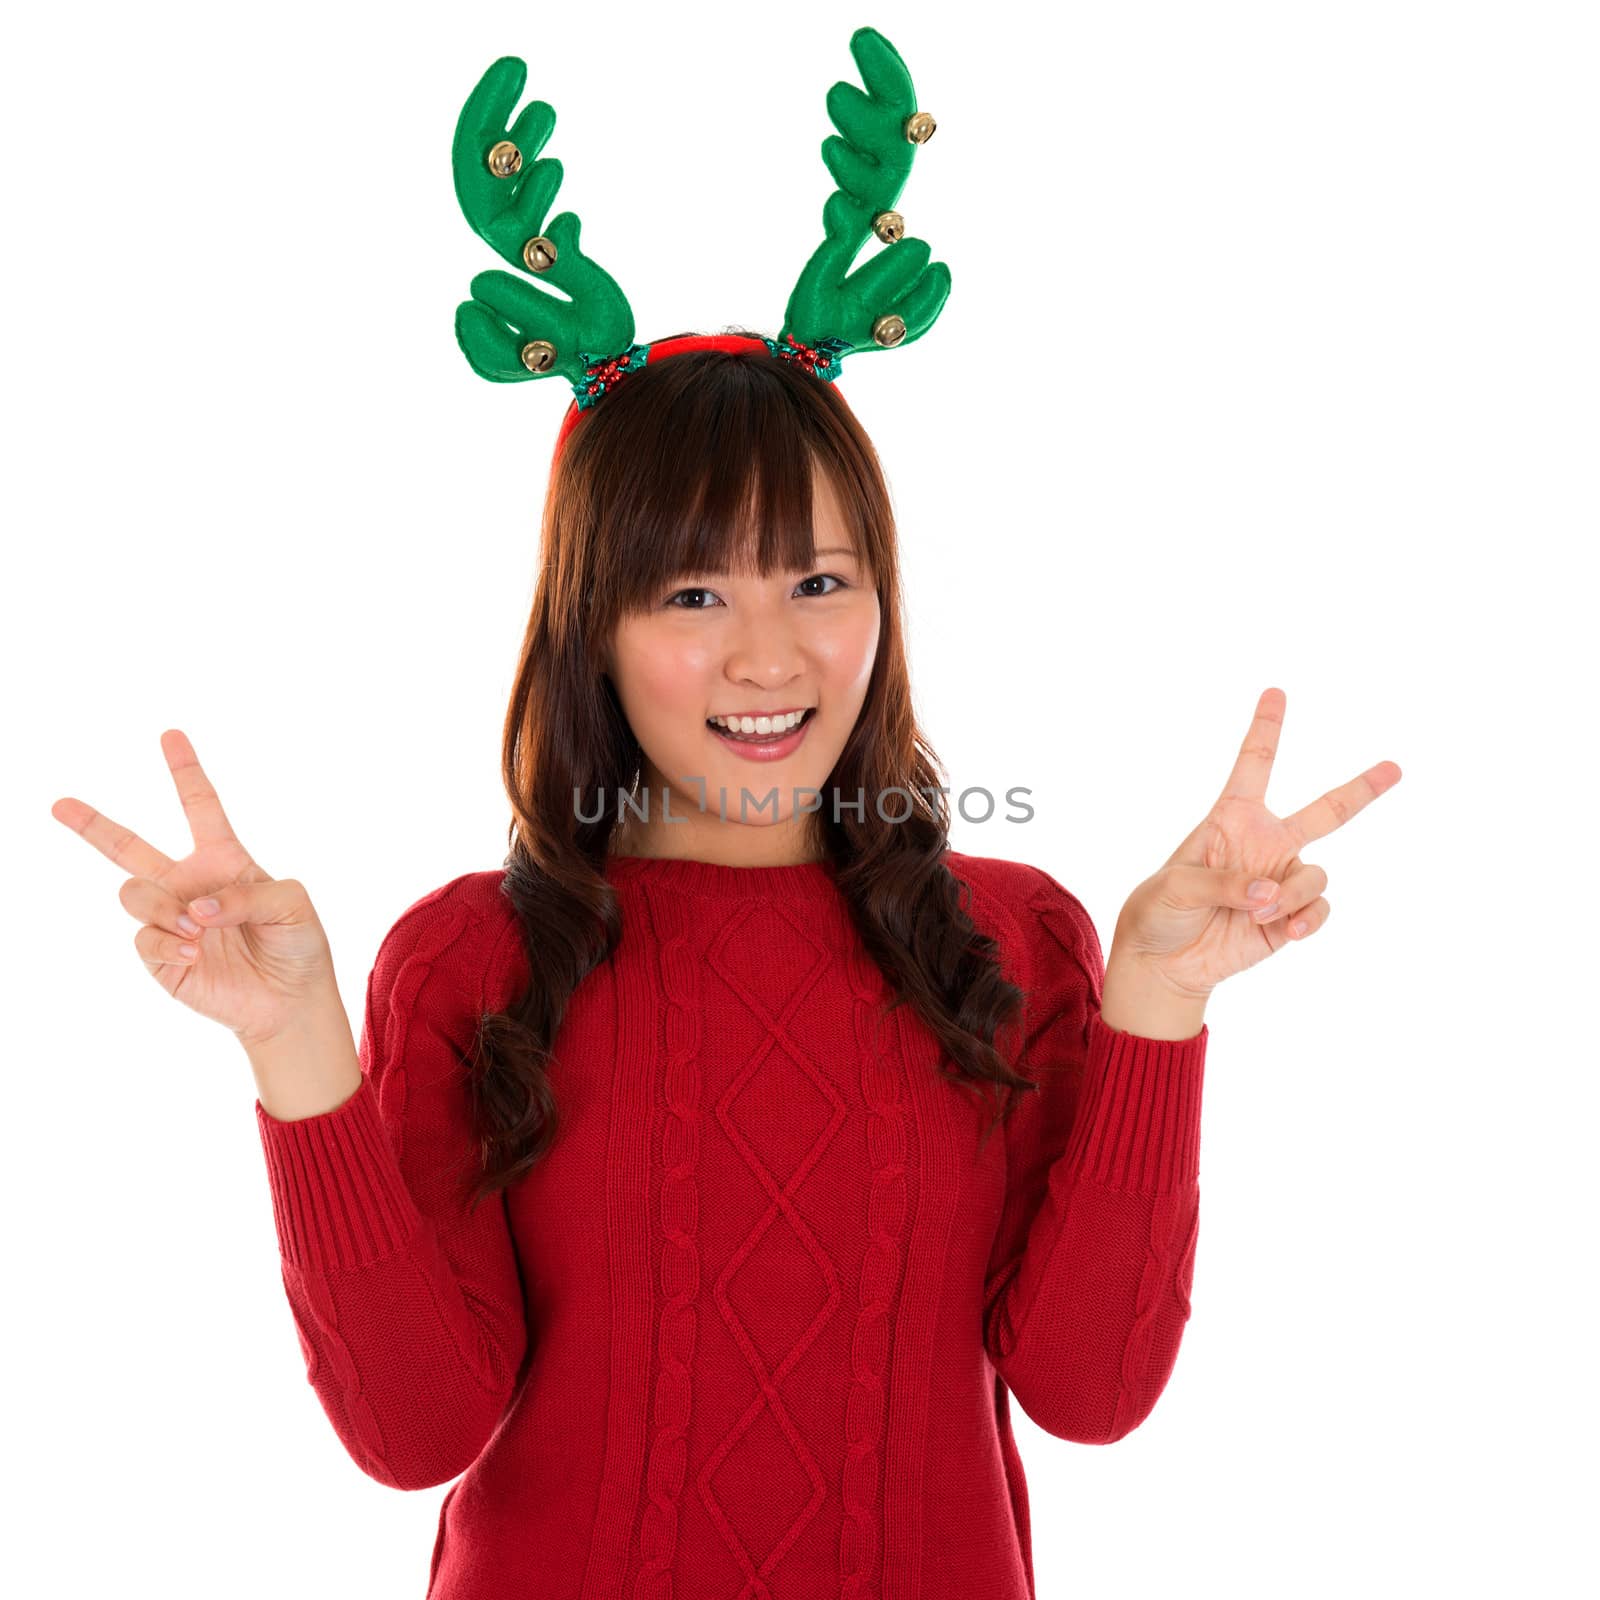 Asian Christmas girl showing victory sign. Lovely young girl gestures v fingers smiling happy isolated on white background.